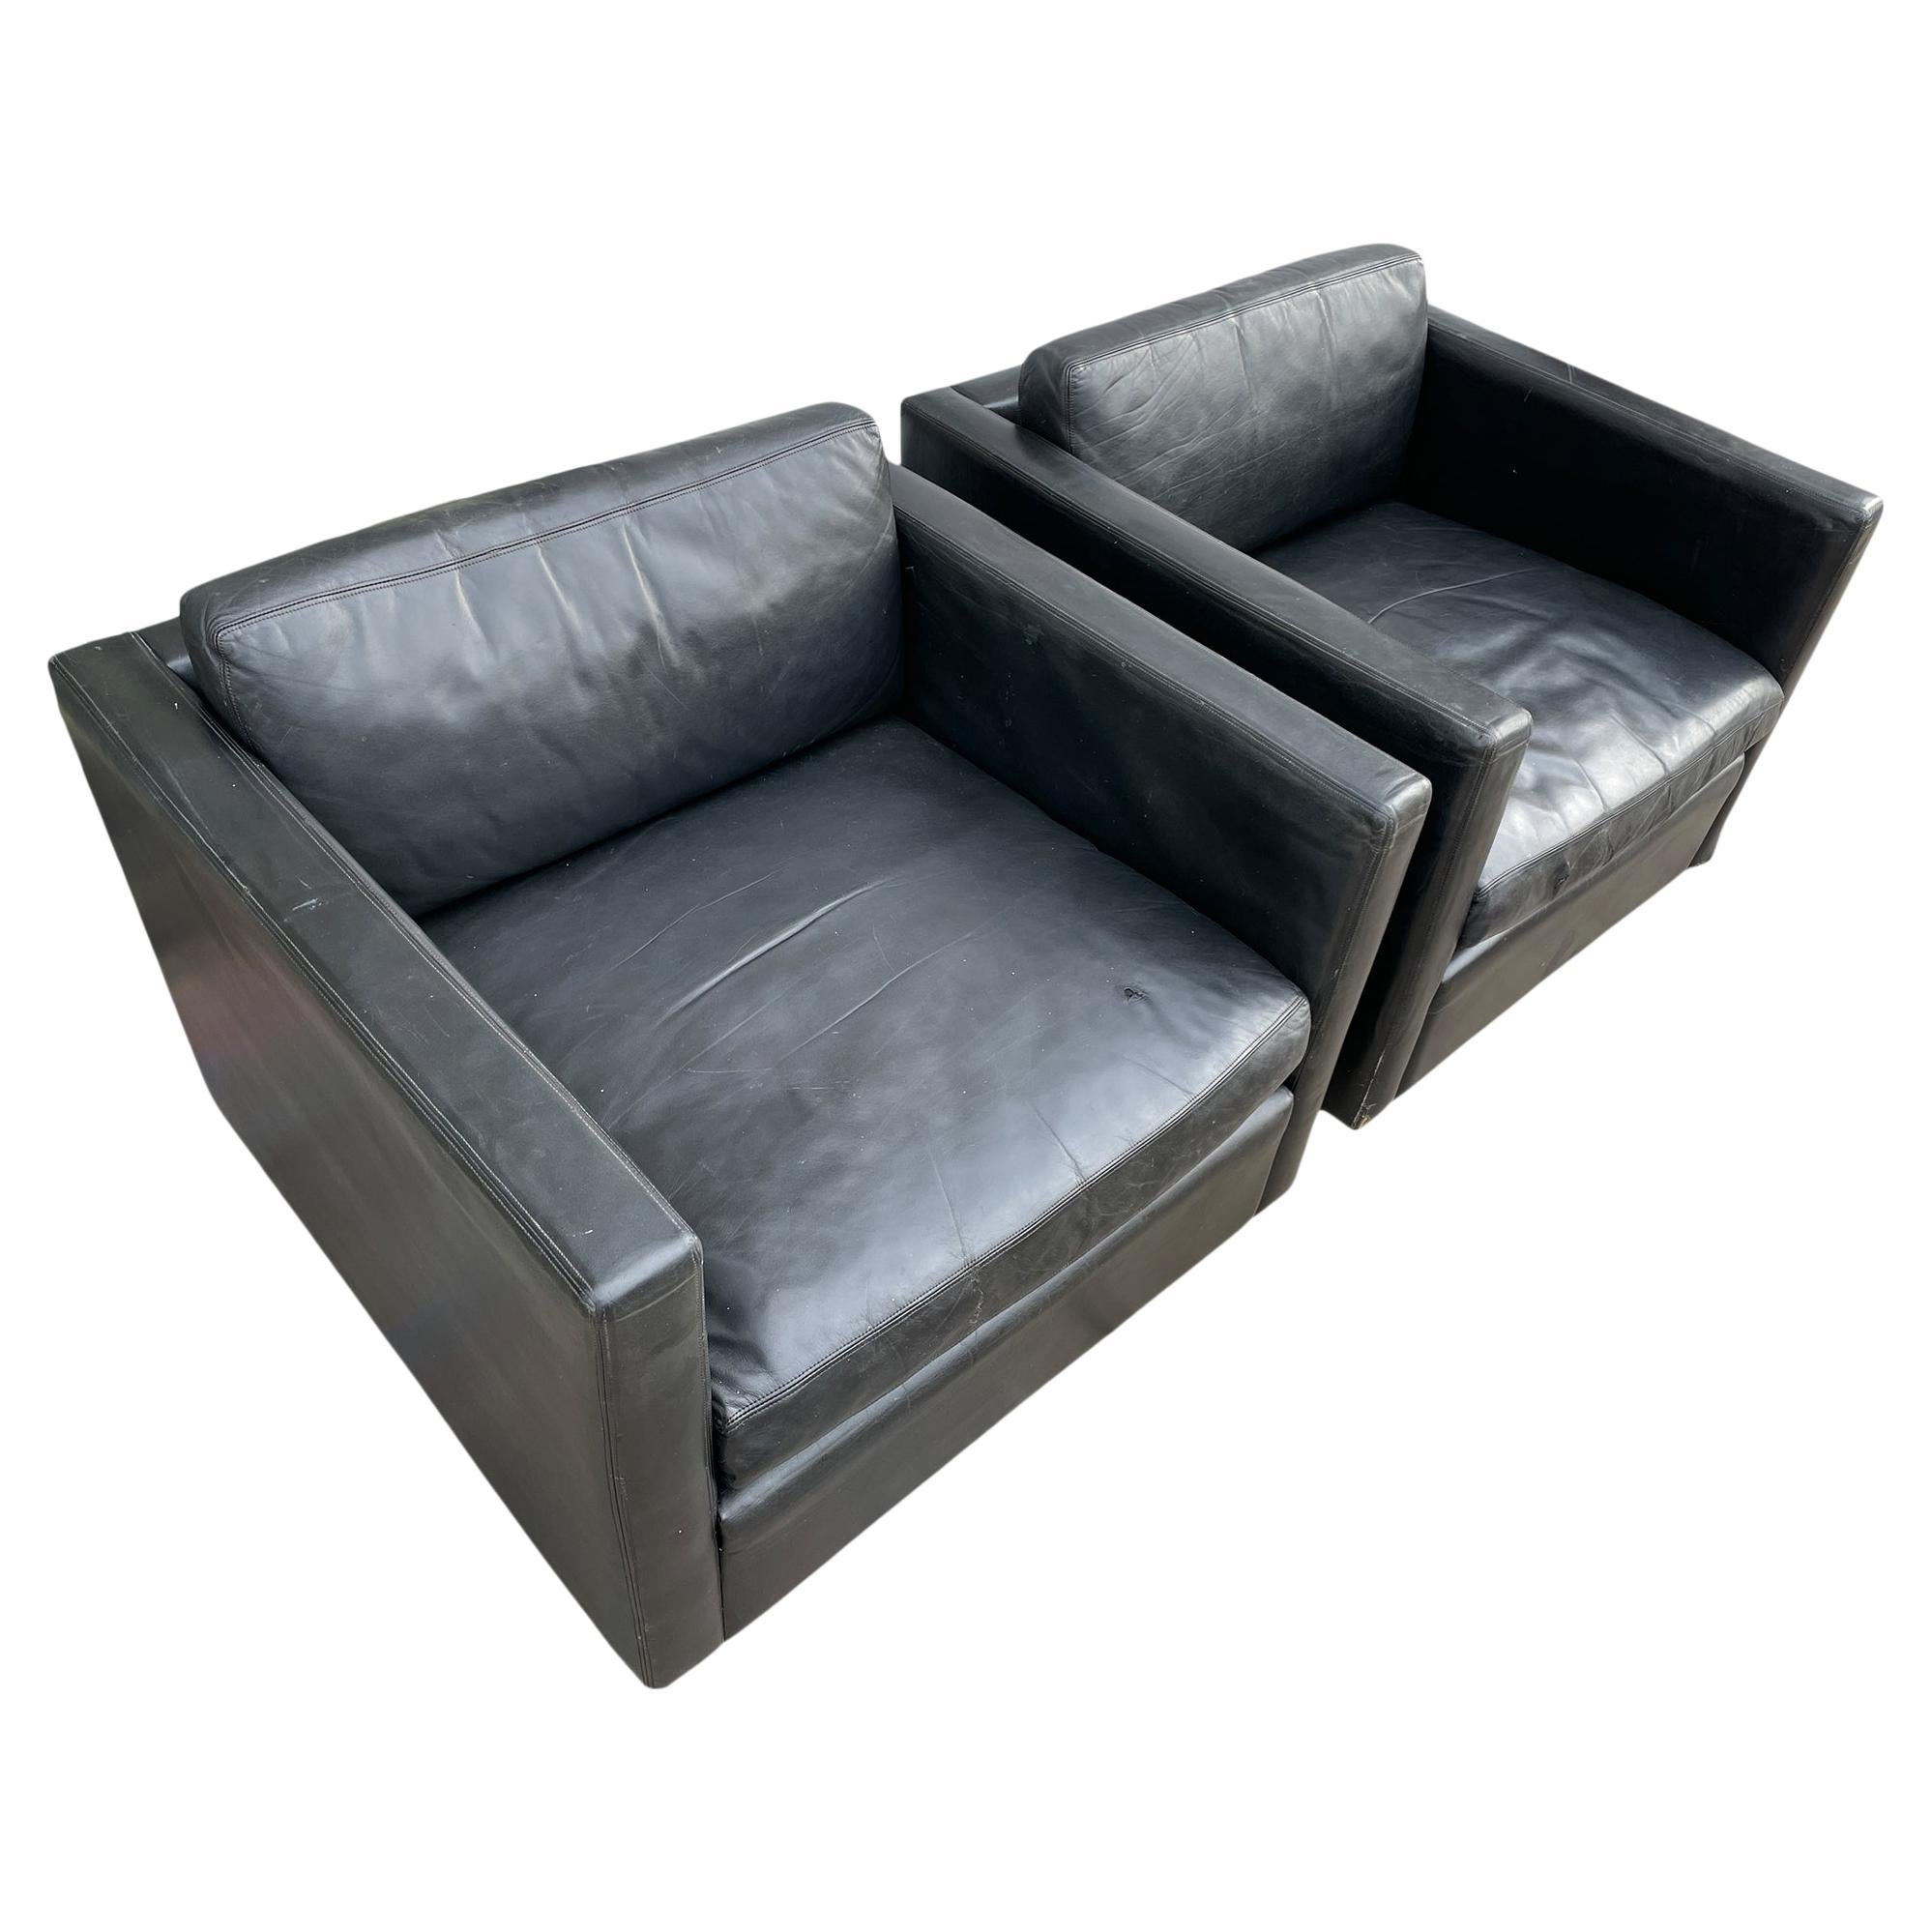 Mid-Century Modern Pfister Cube Lounge Chairs for Knoll in Black Leather For Sale